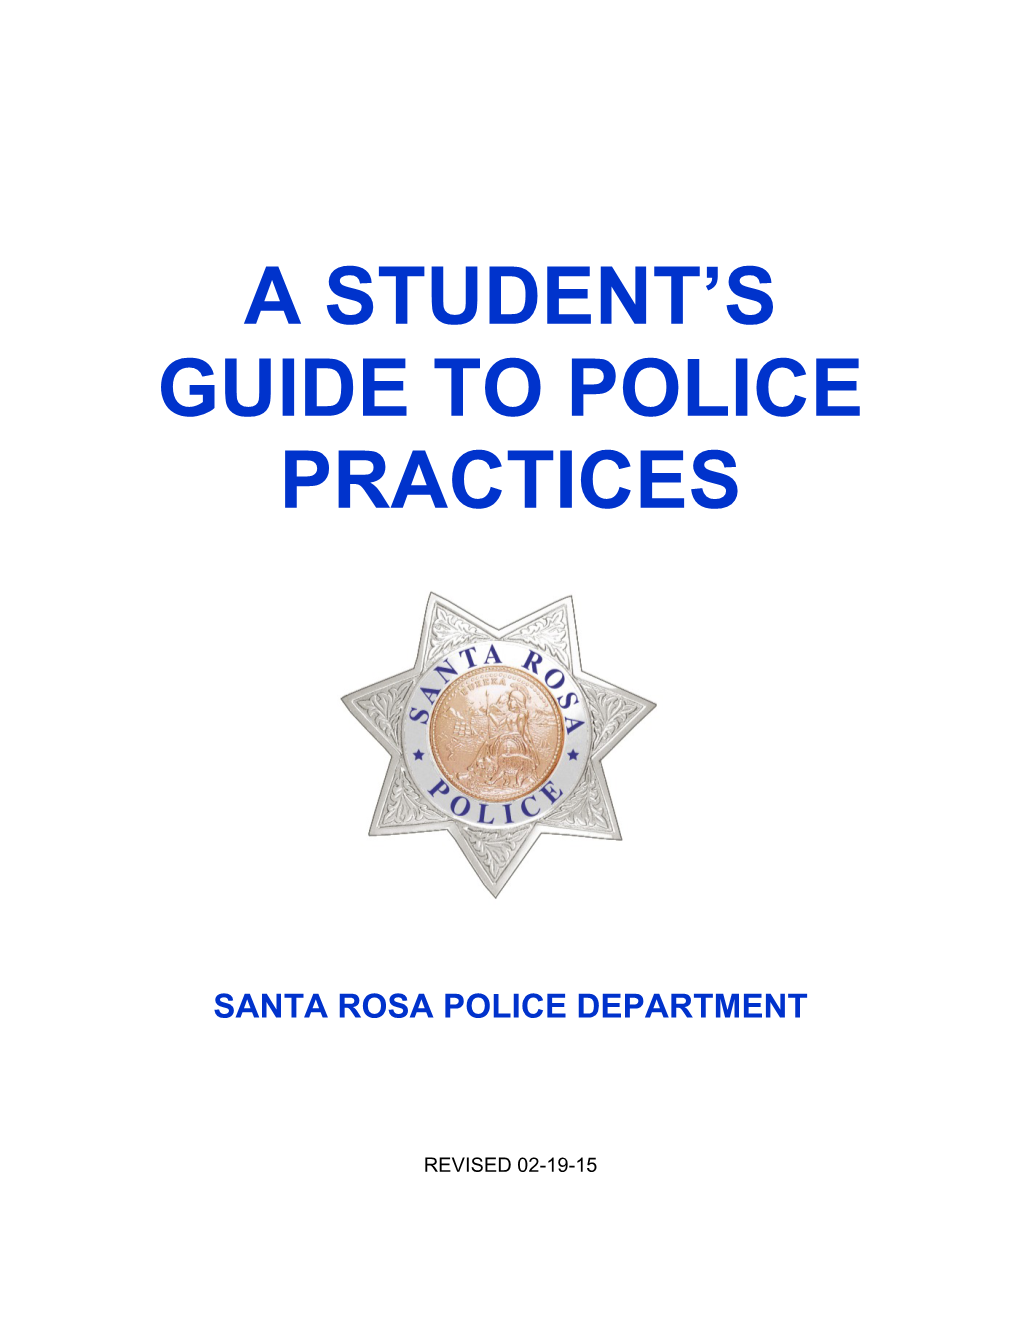 A Student's Guide to Police Practices